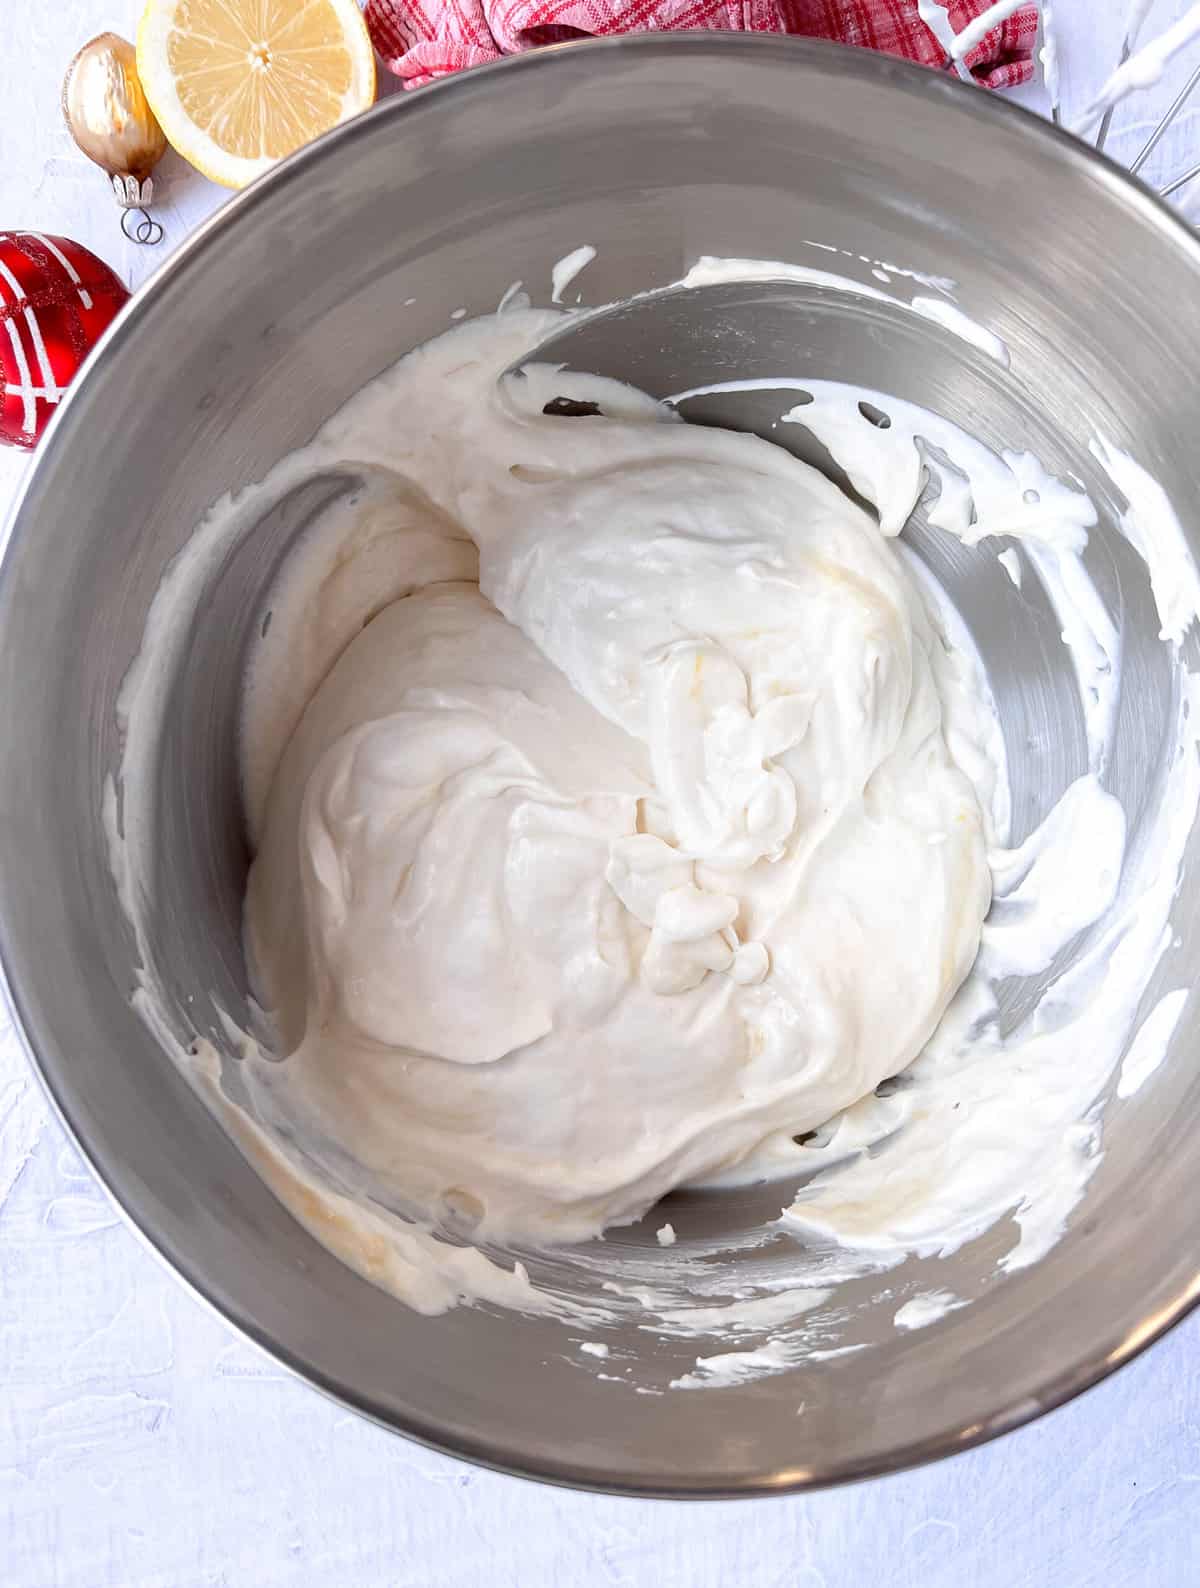 Whipped cream in a silver mixing bowl.